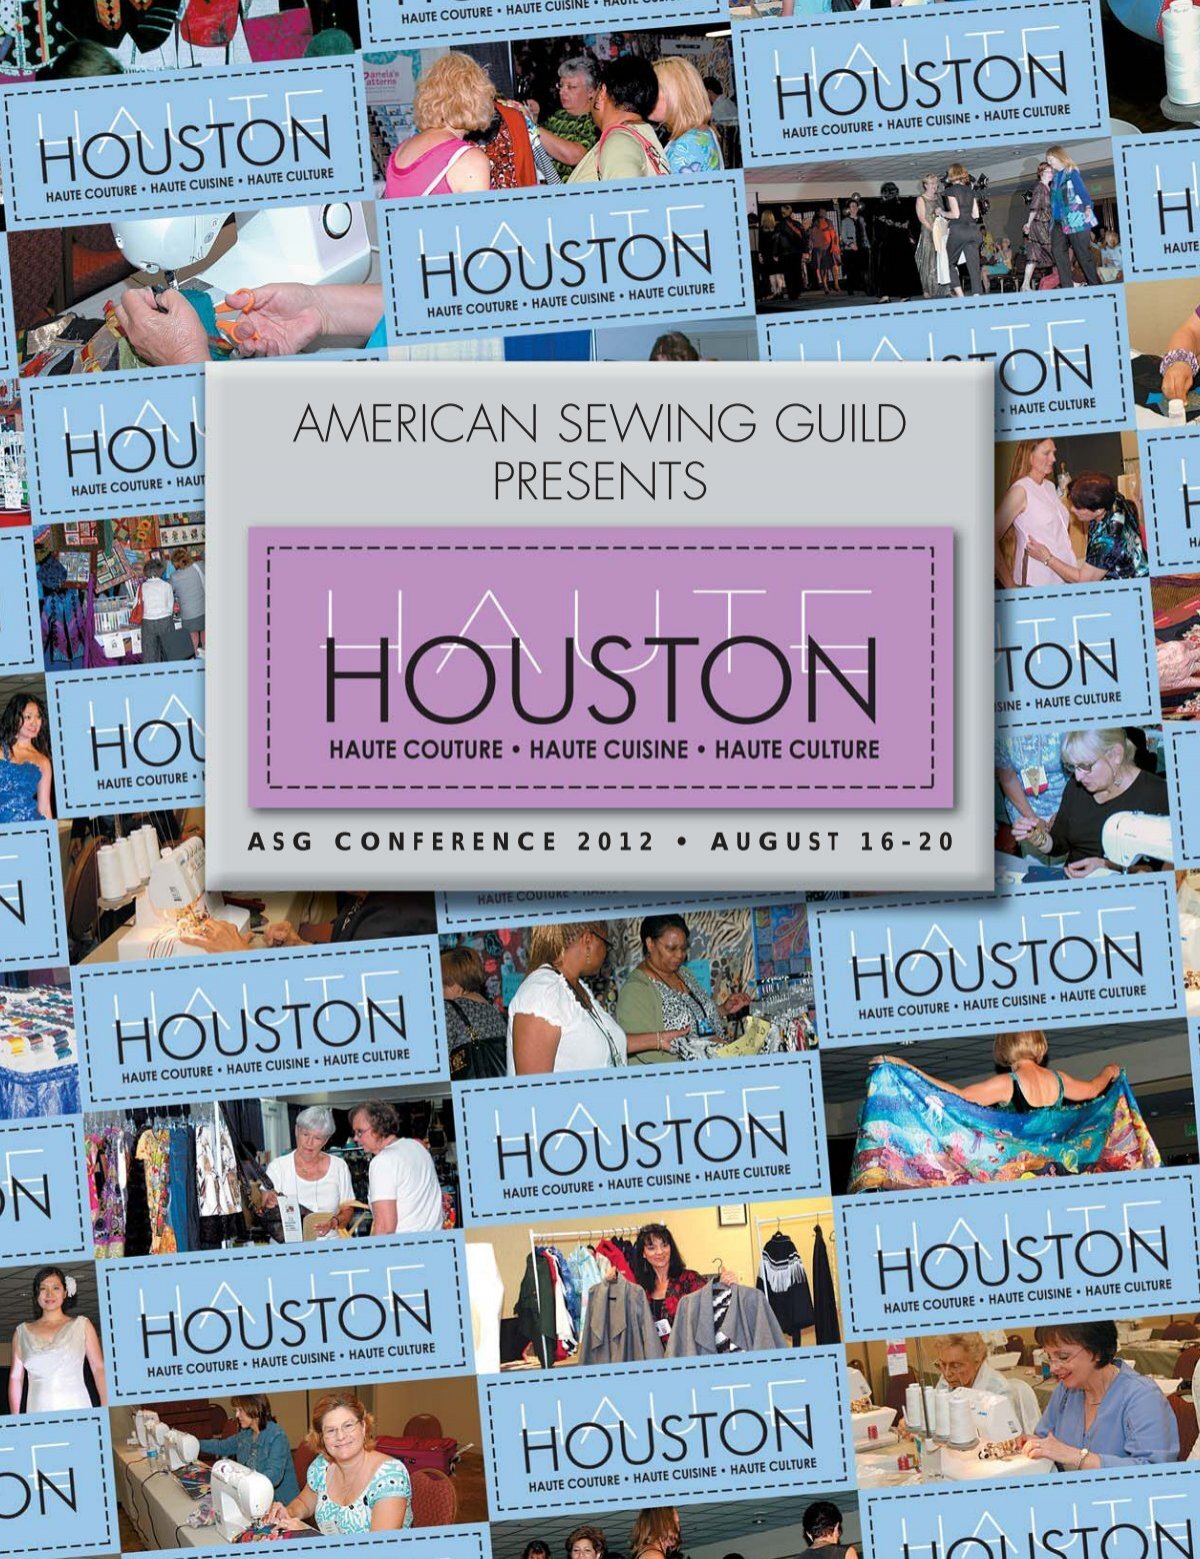 It's Houston! - The American Sewing Guild